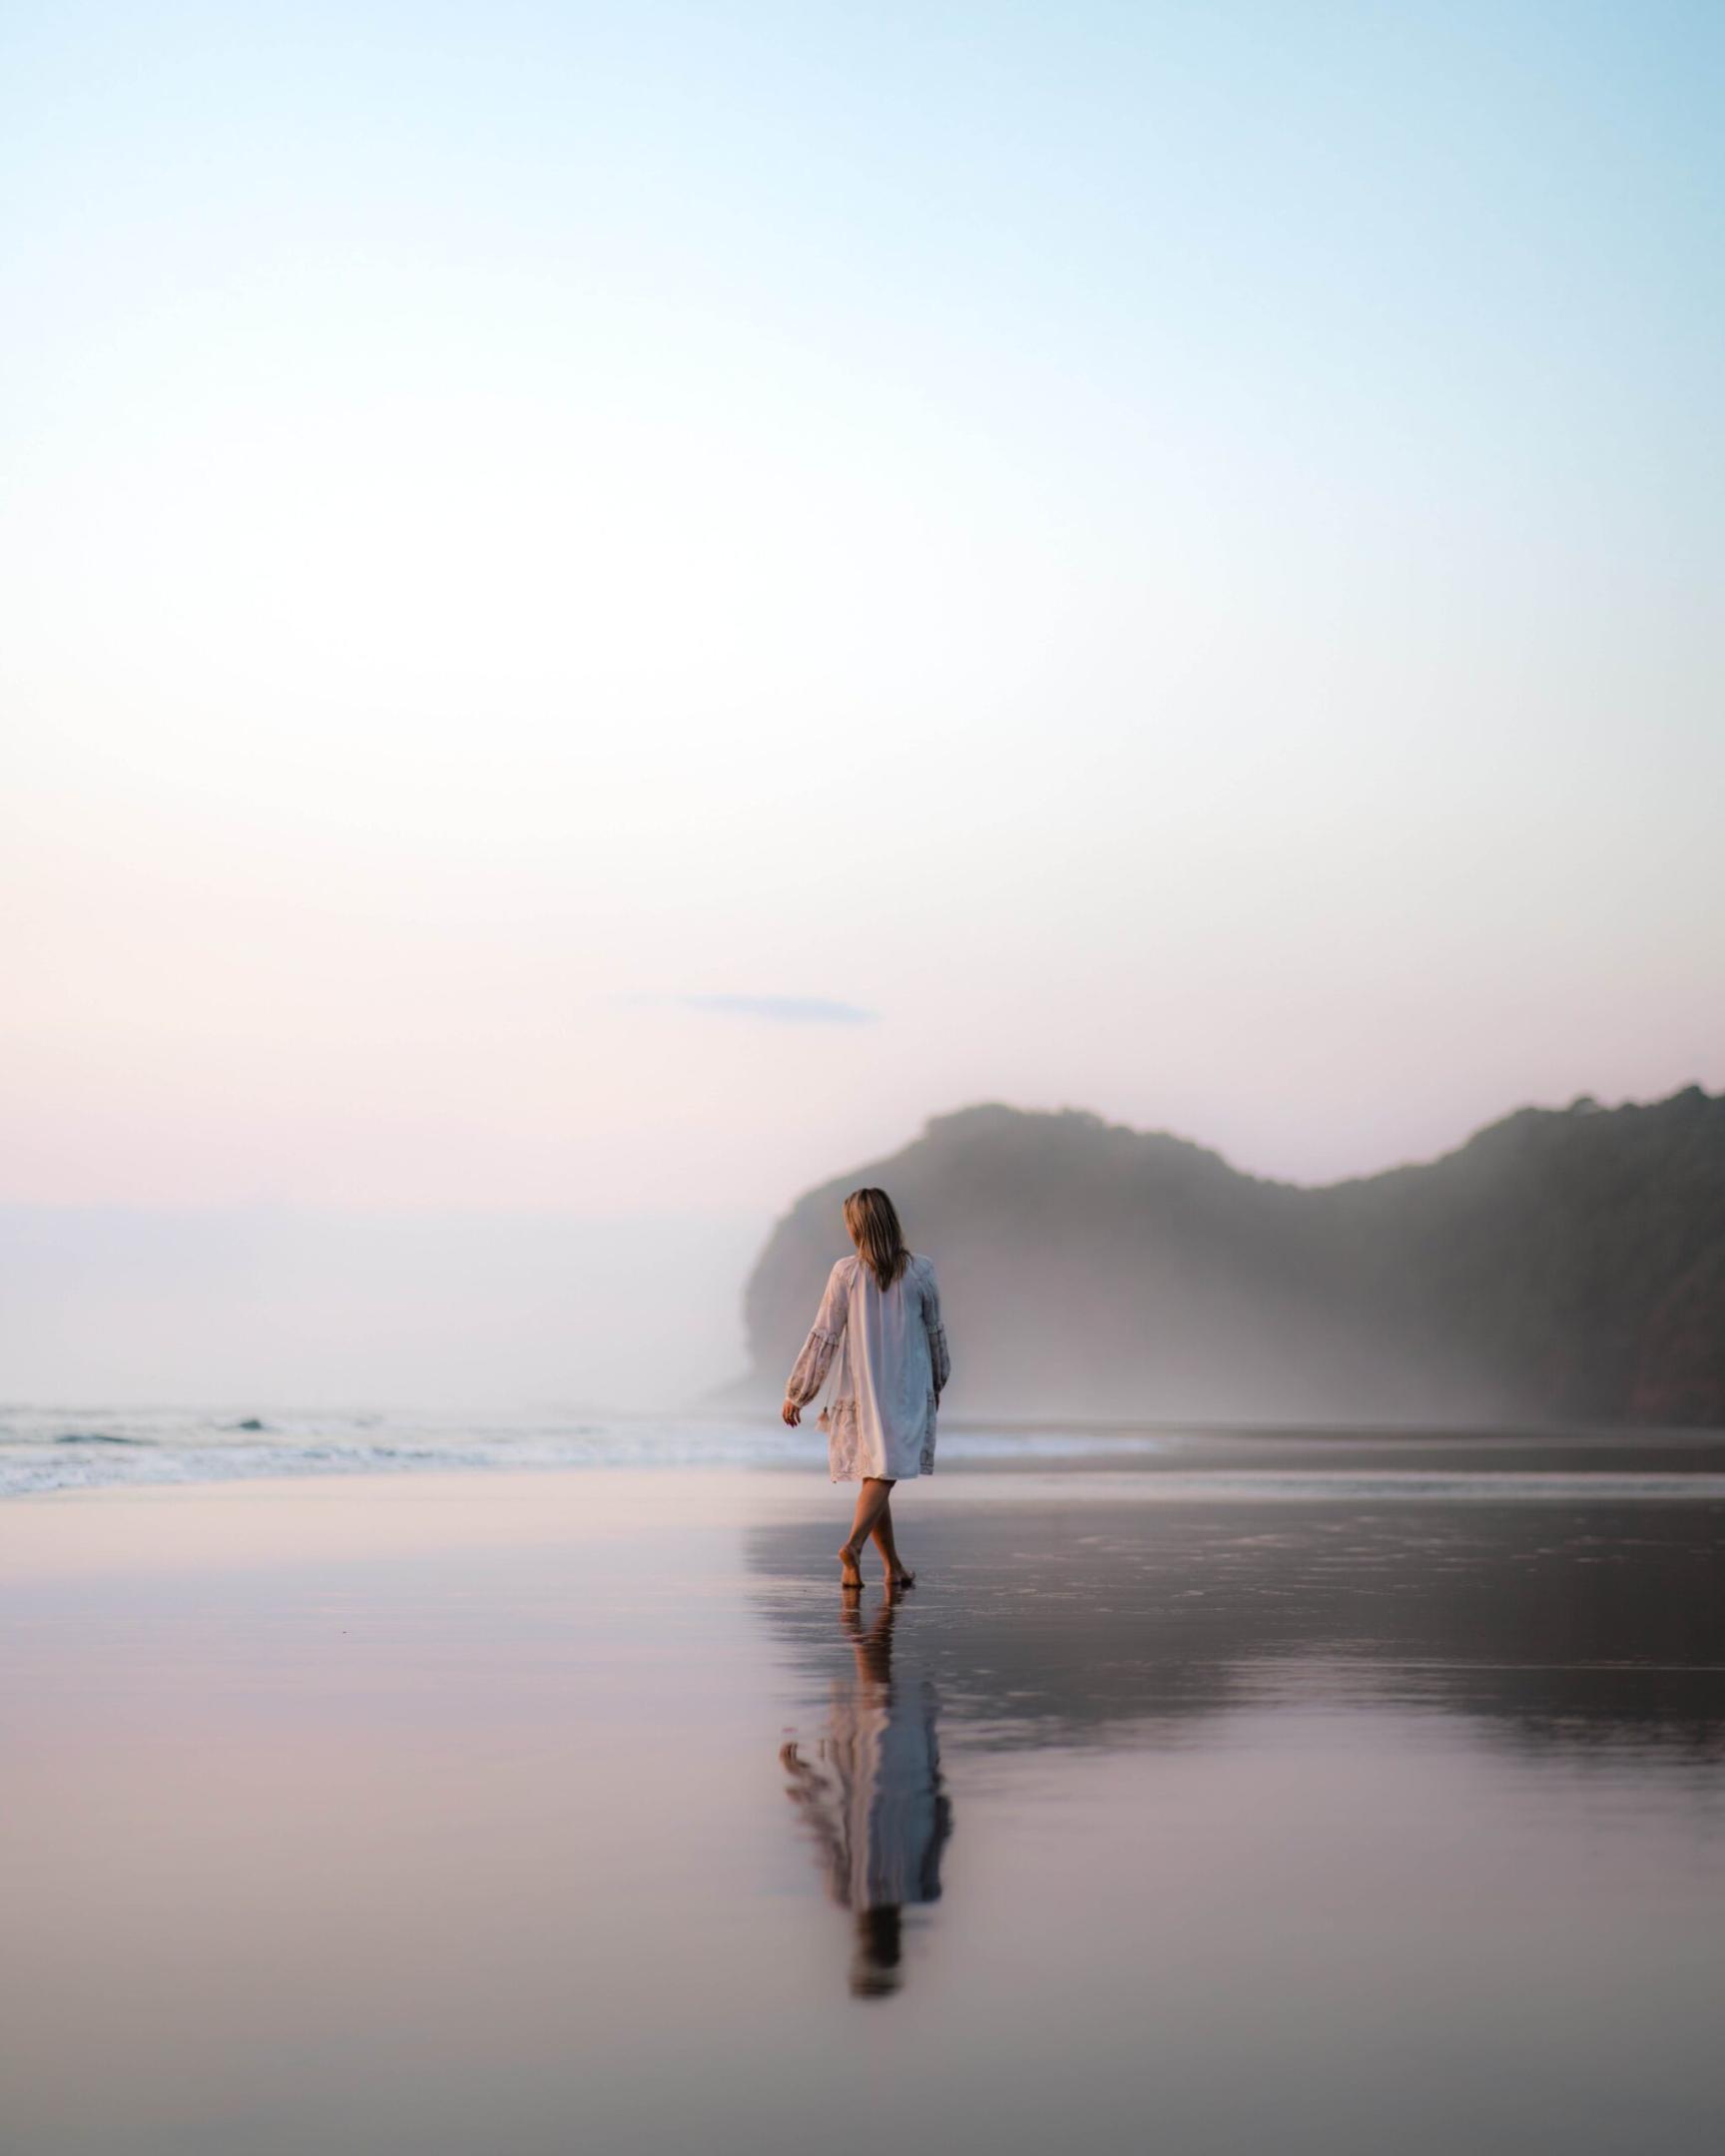 Woman alone on beach/wet sand with cliffs in the background It's Always Been You Blog Post